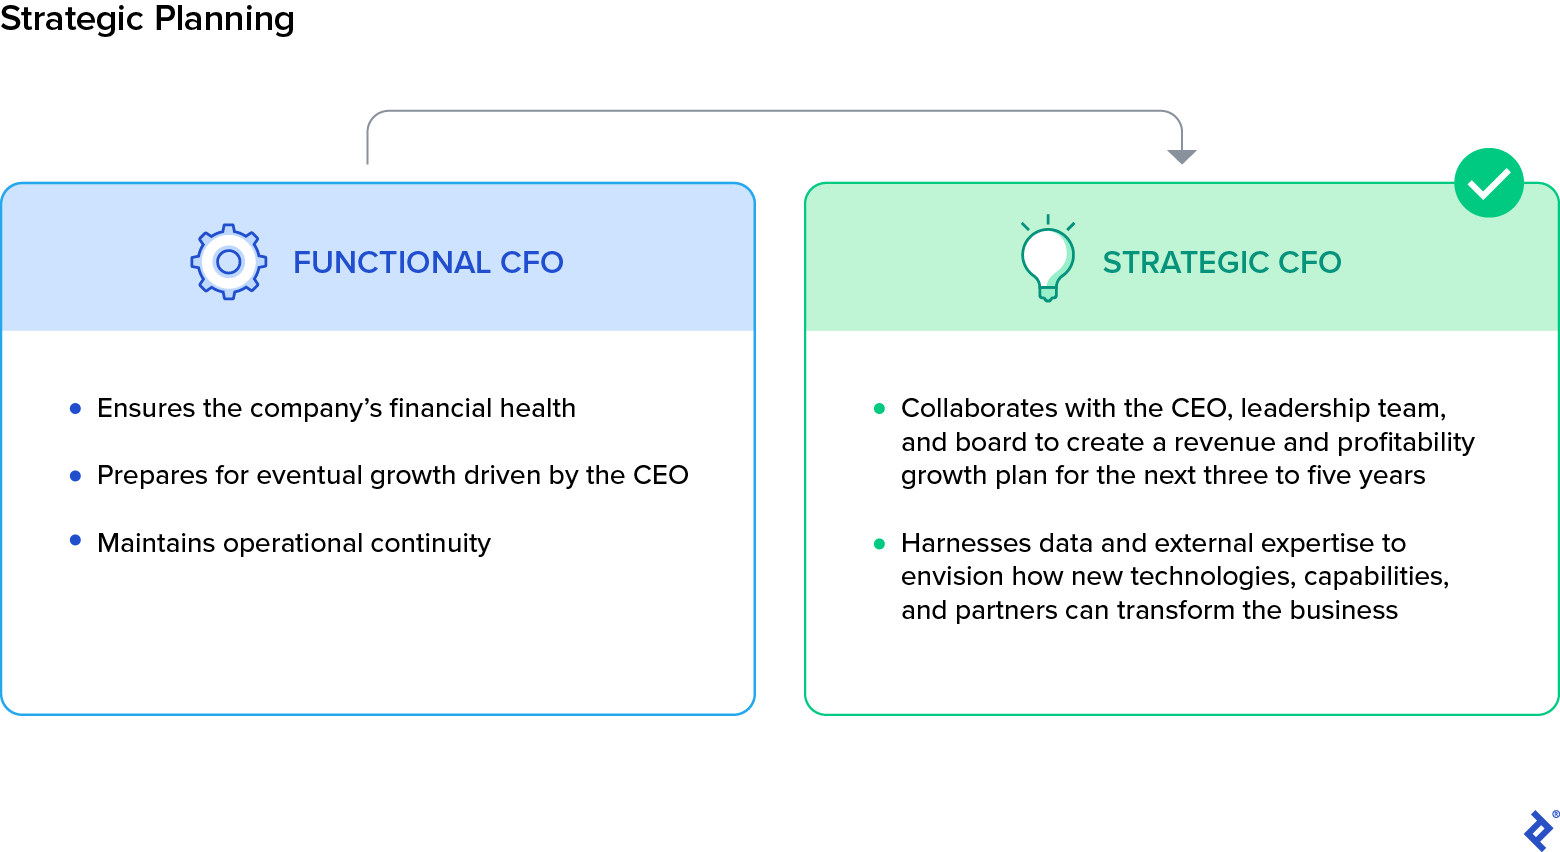 The functional CFO ensures the company’s financial health, prepares for growth driven by the CEO, and maintains operational continuity. The strategic CFO collaborates with leadership to create a revenue and profitability growth plan for the next three to five years, and harnesses data and external expertise to envision how new technologies, capabilities, and partners can transform the business.